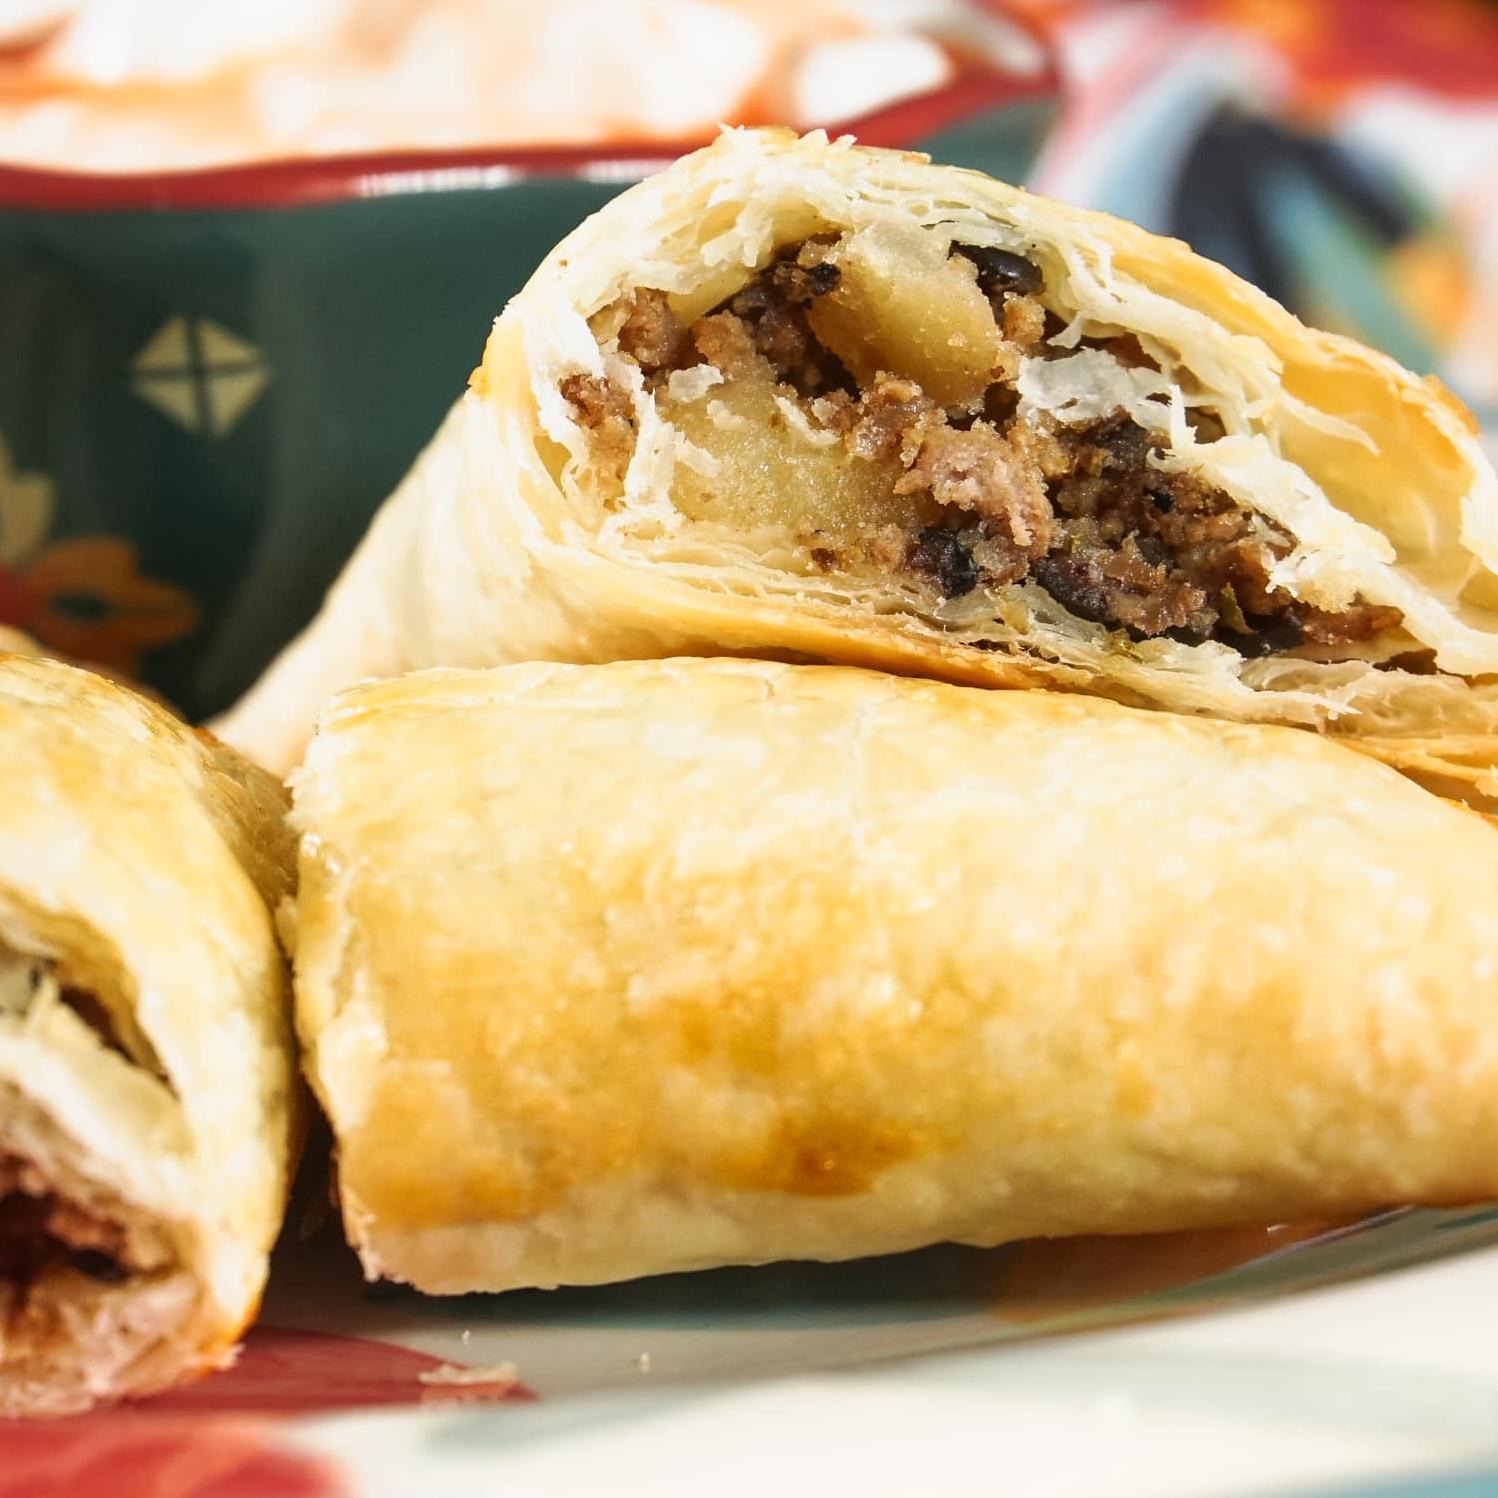  Get ready to add some spice to your life with these beef and potato empanadas.